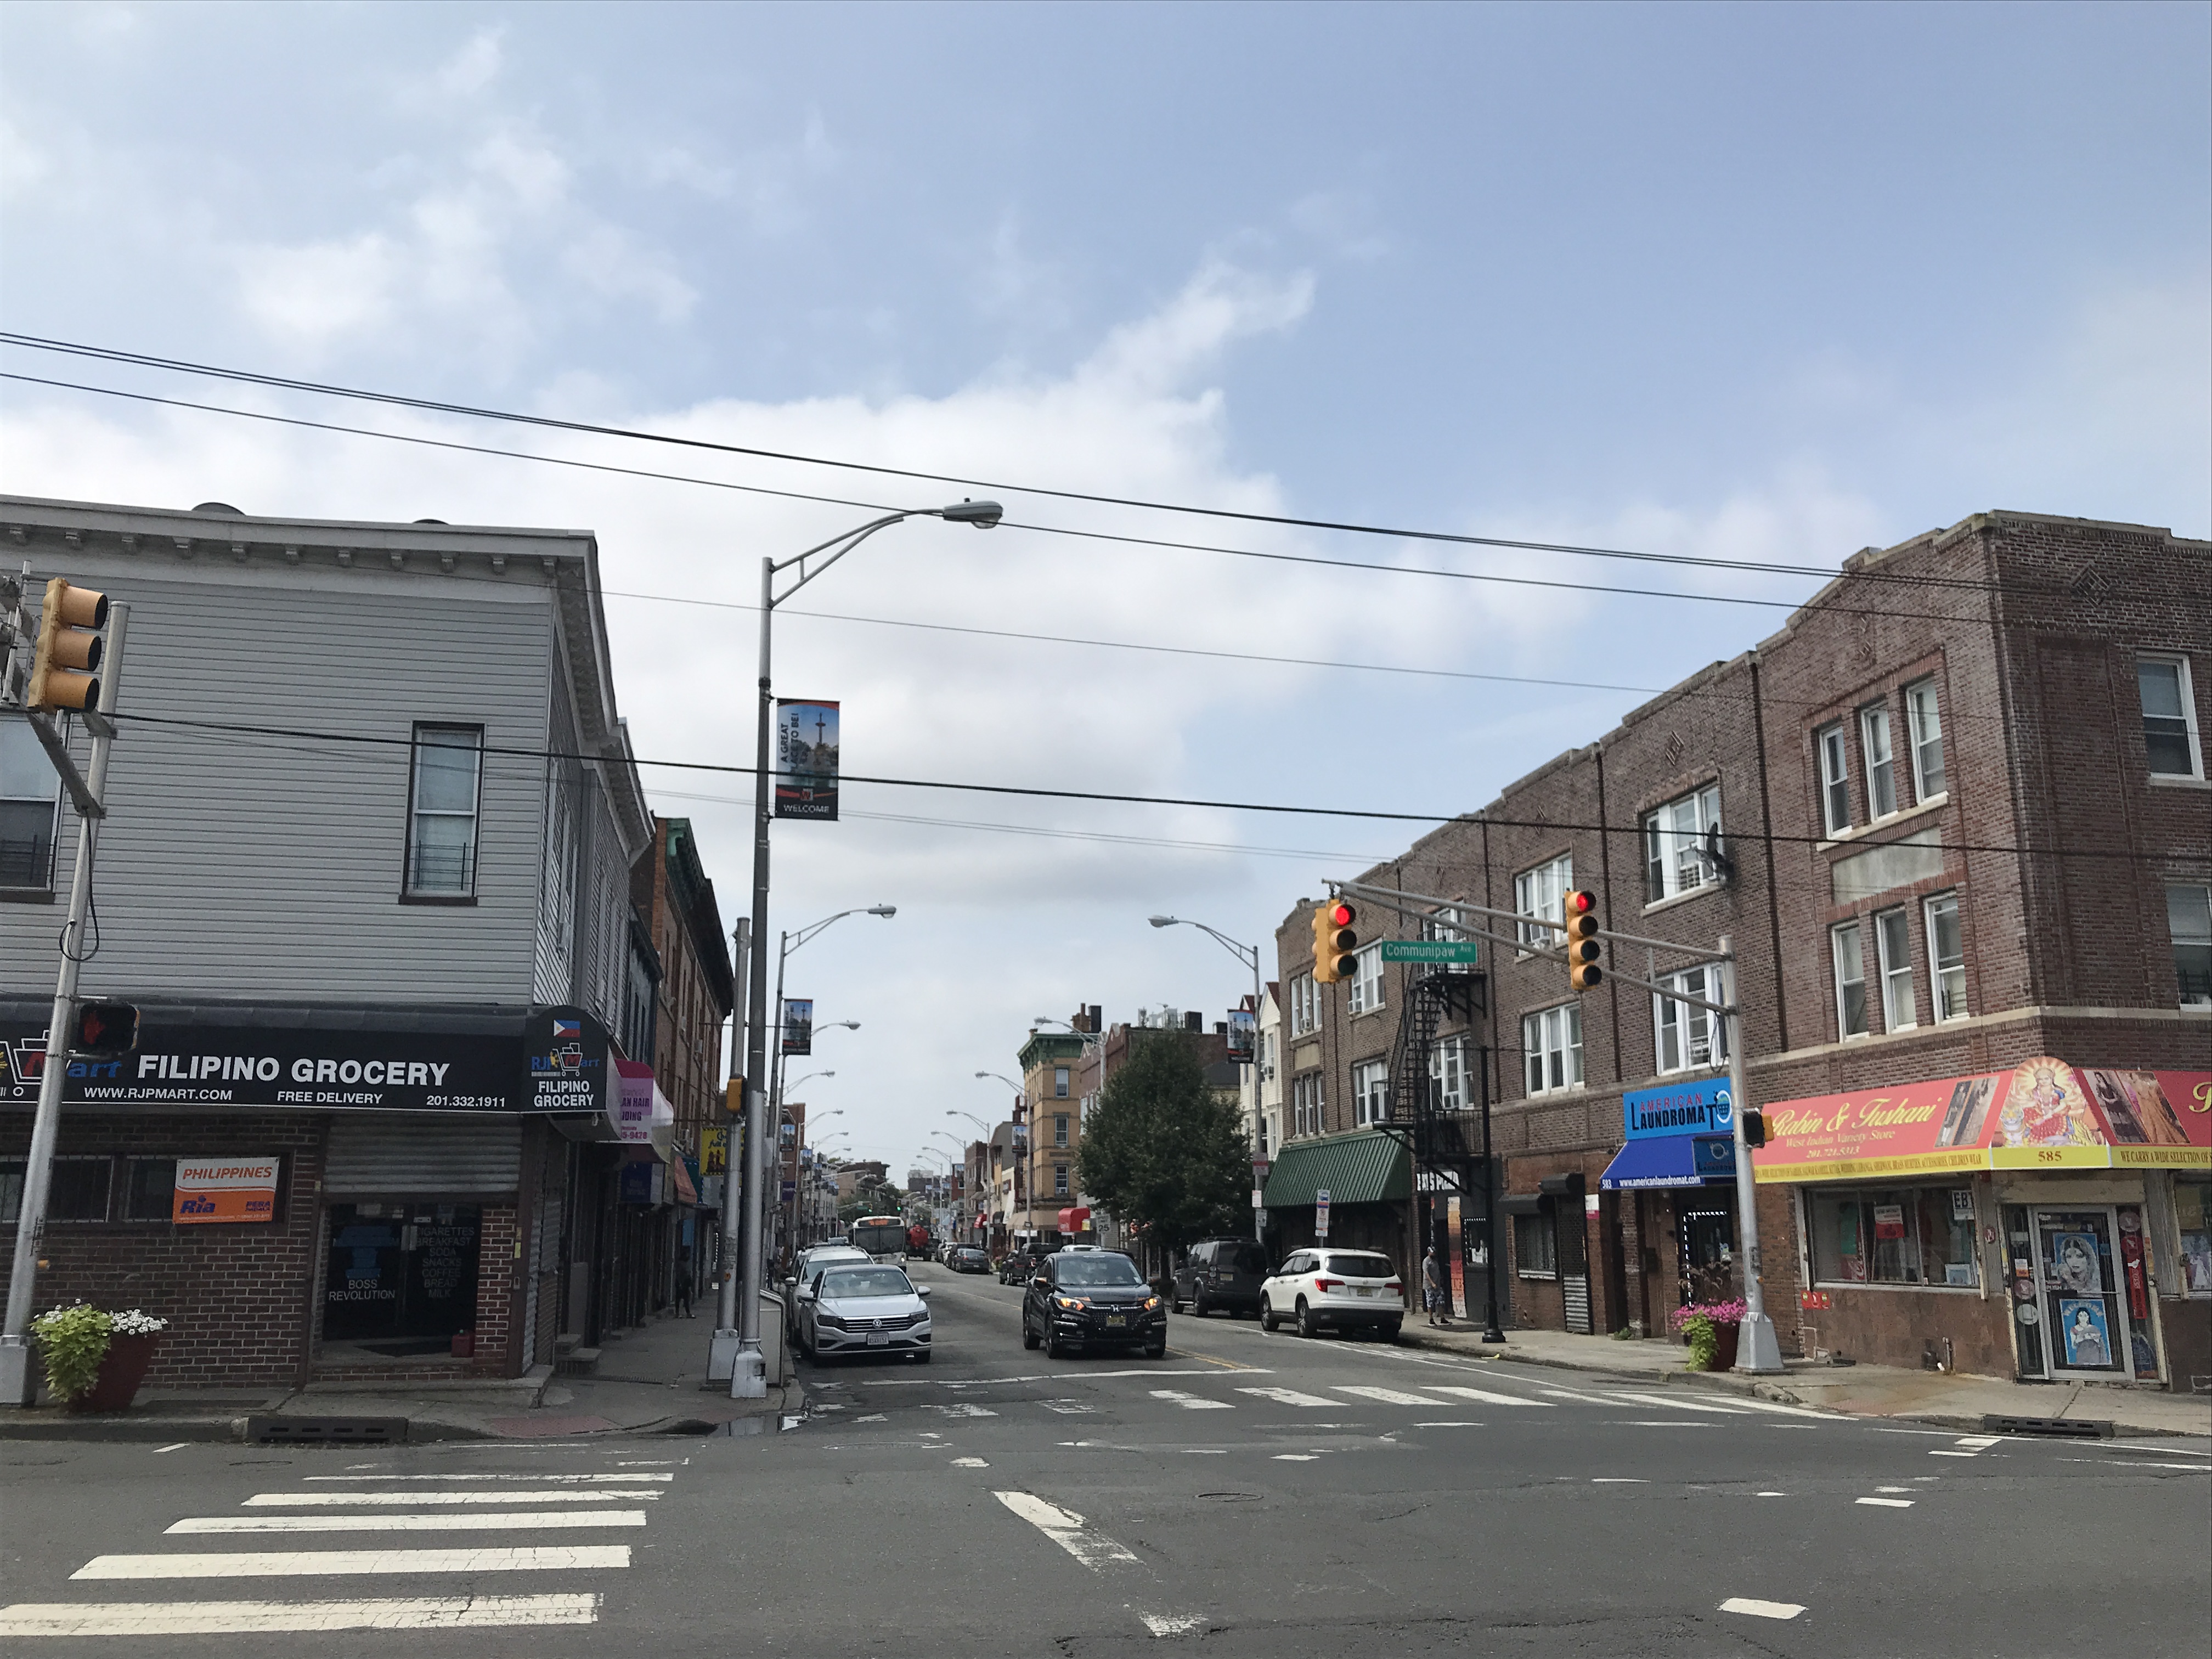 West Side Avenue includes a Filipino grocer. Partly cloudy blue sky. Jersey City, New Jersey, United States